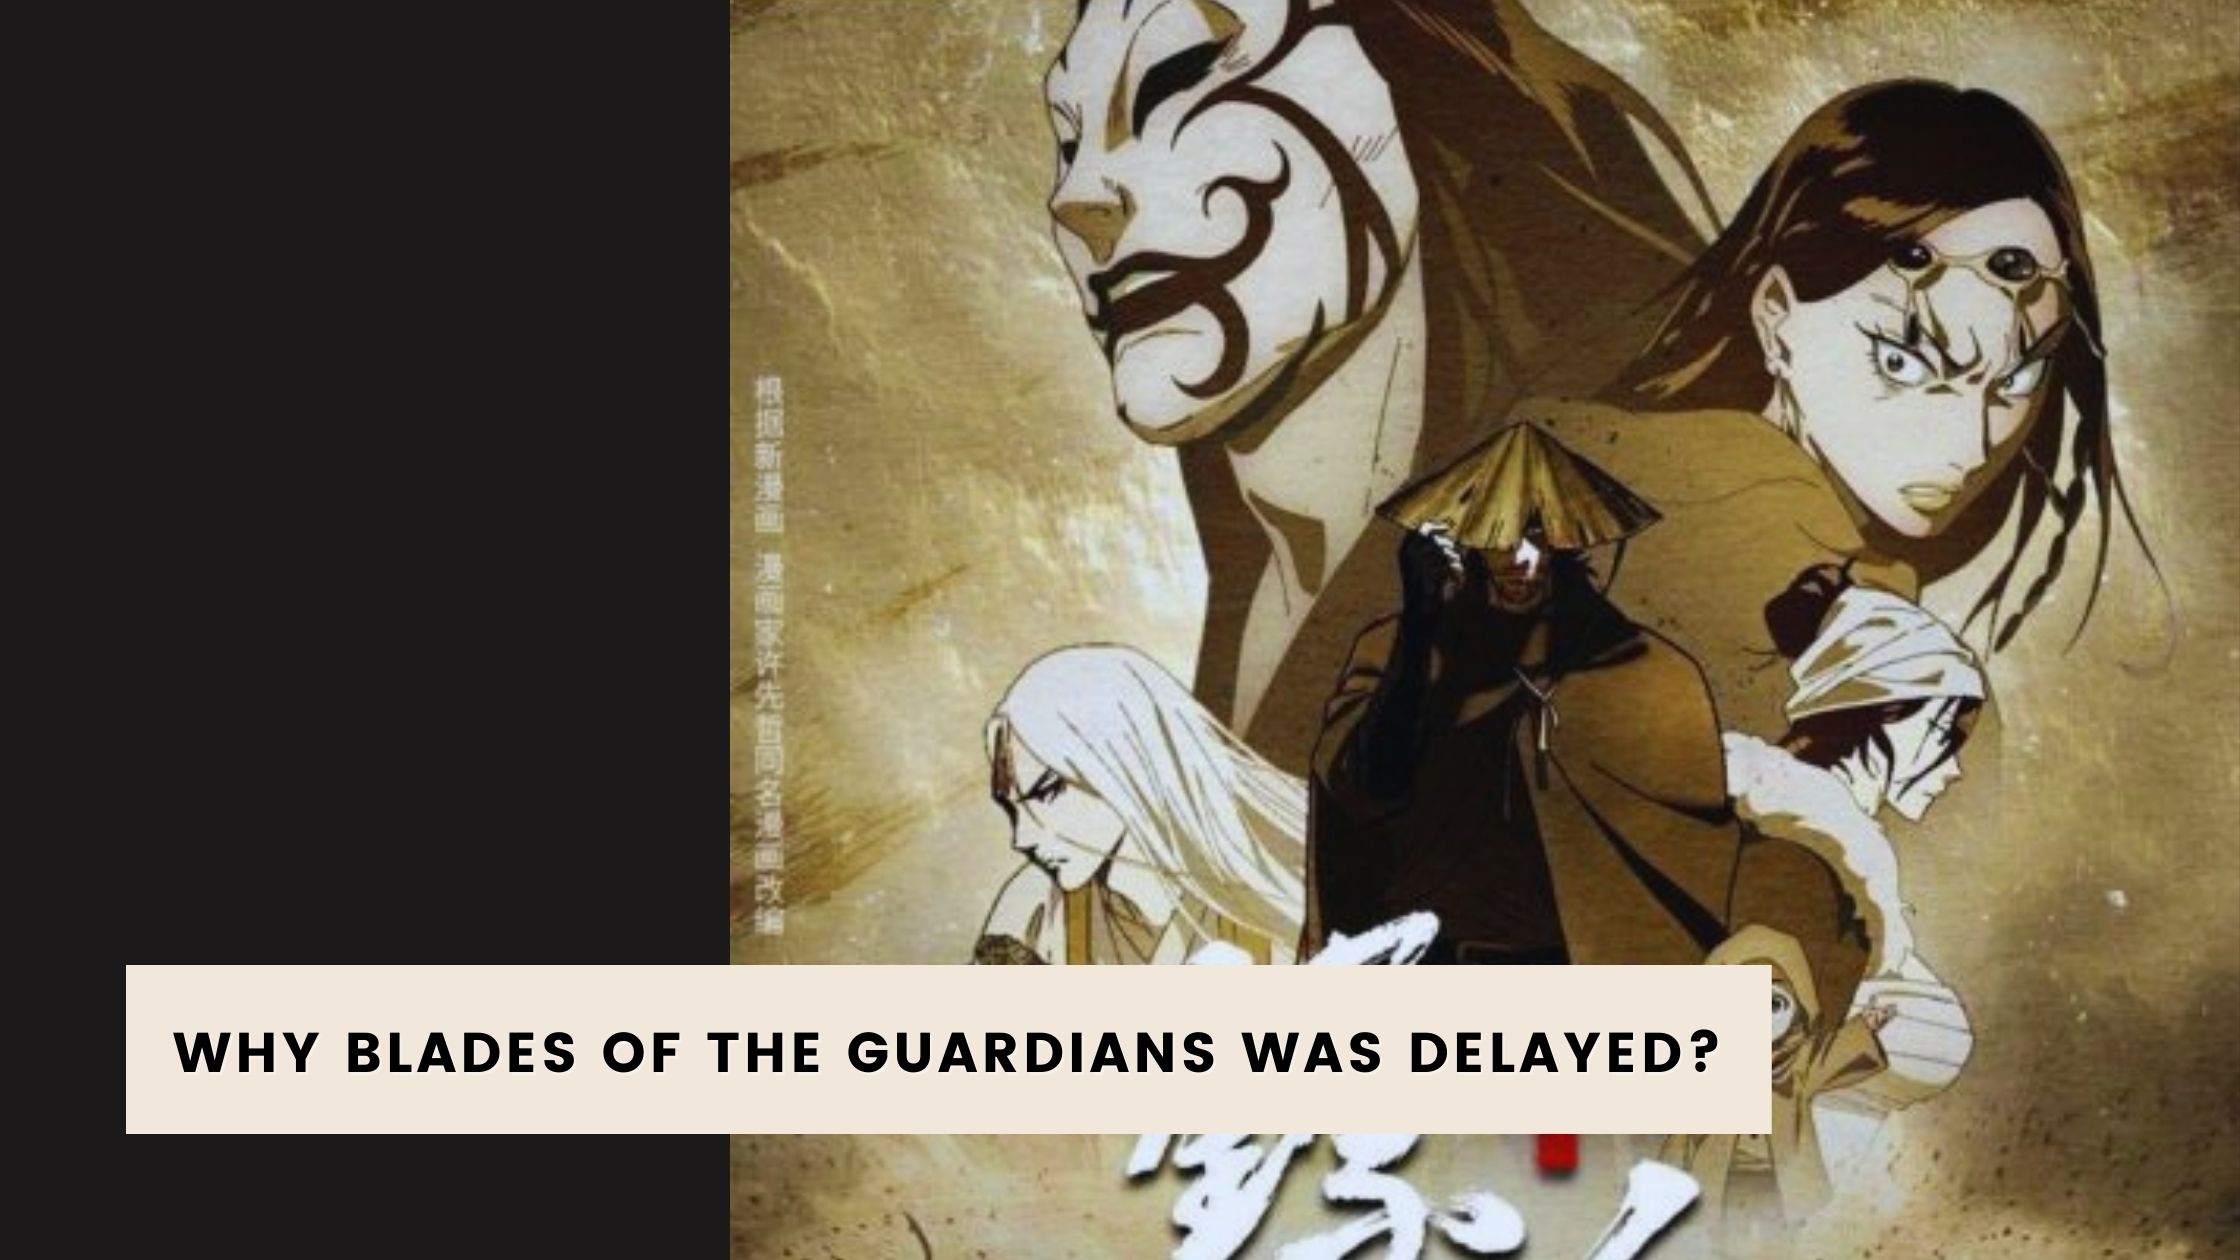 Blades of the Guardians is set to be released in 2023